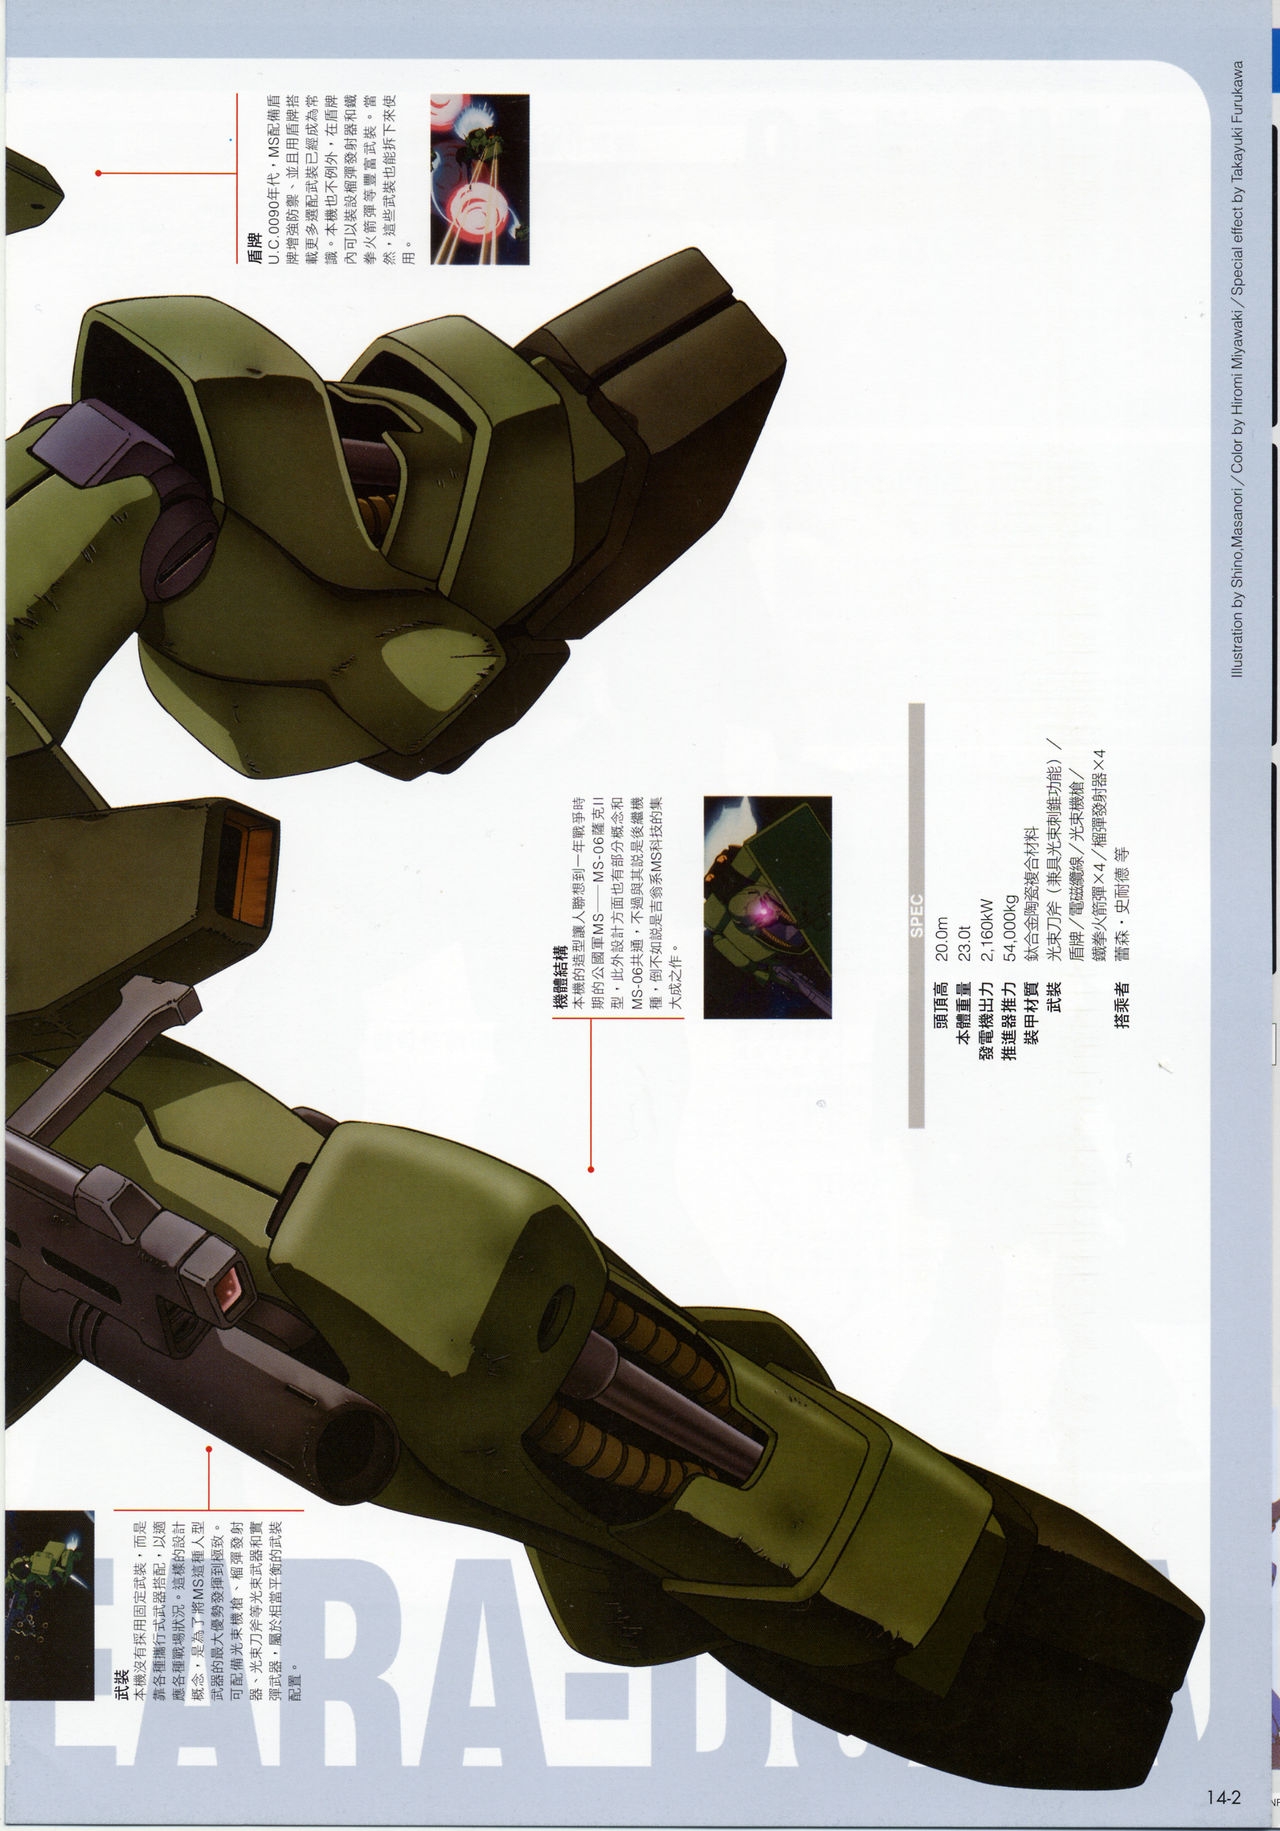 The Official Gundam Fact File - 014 [Chinese] 4